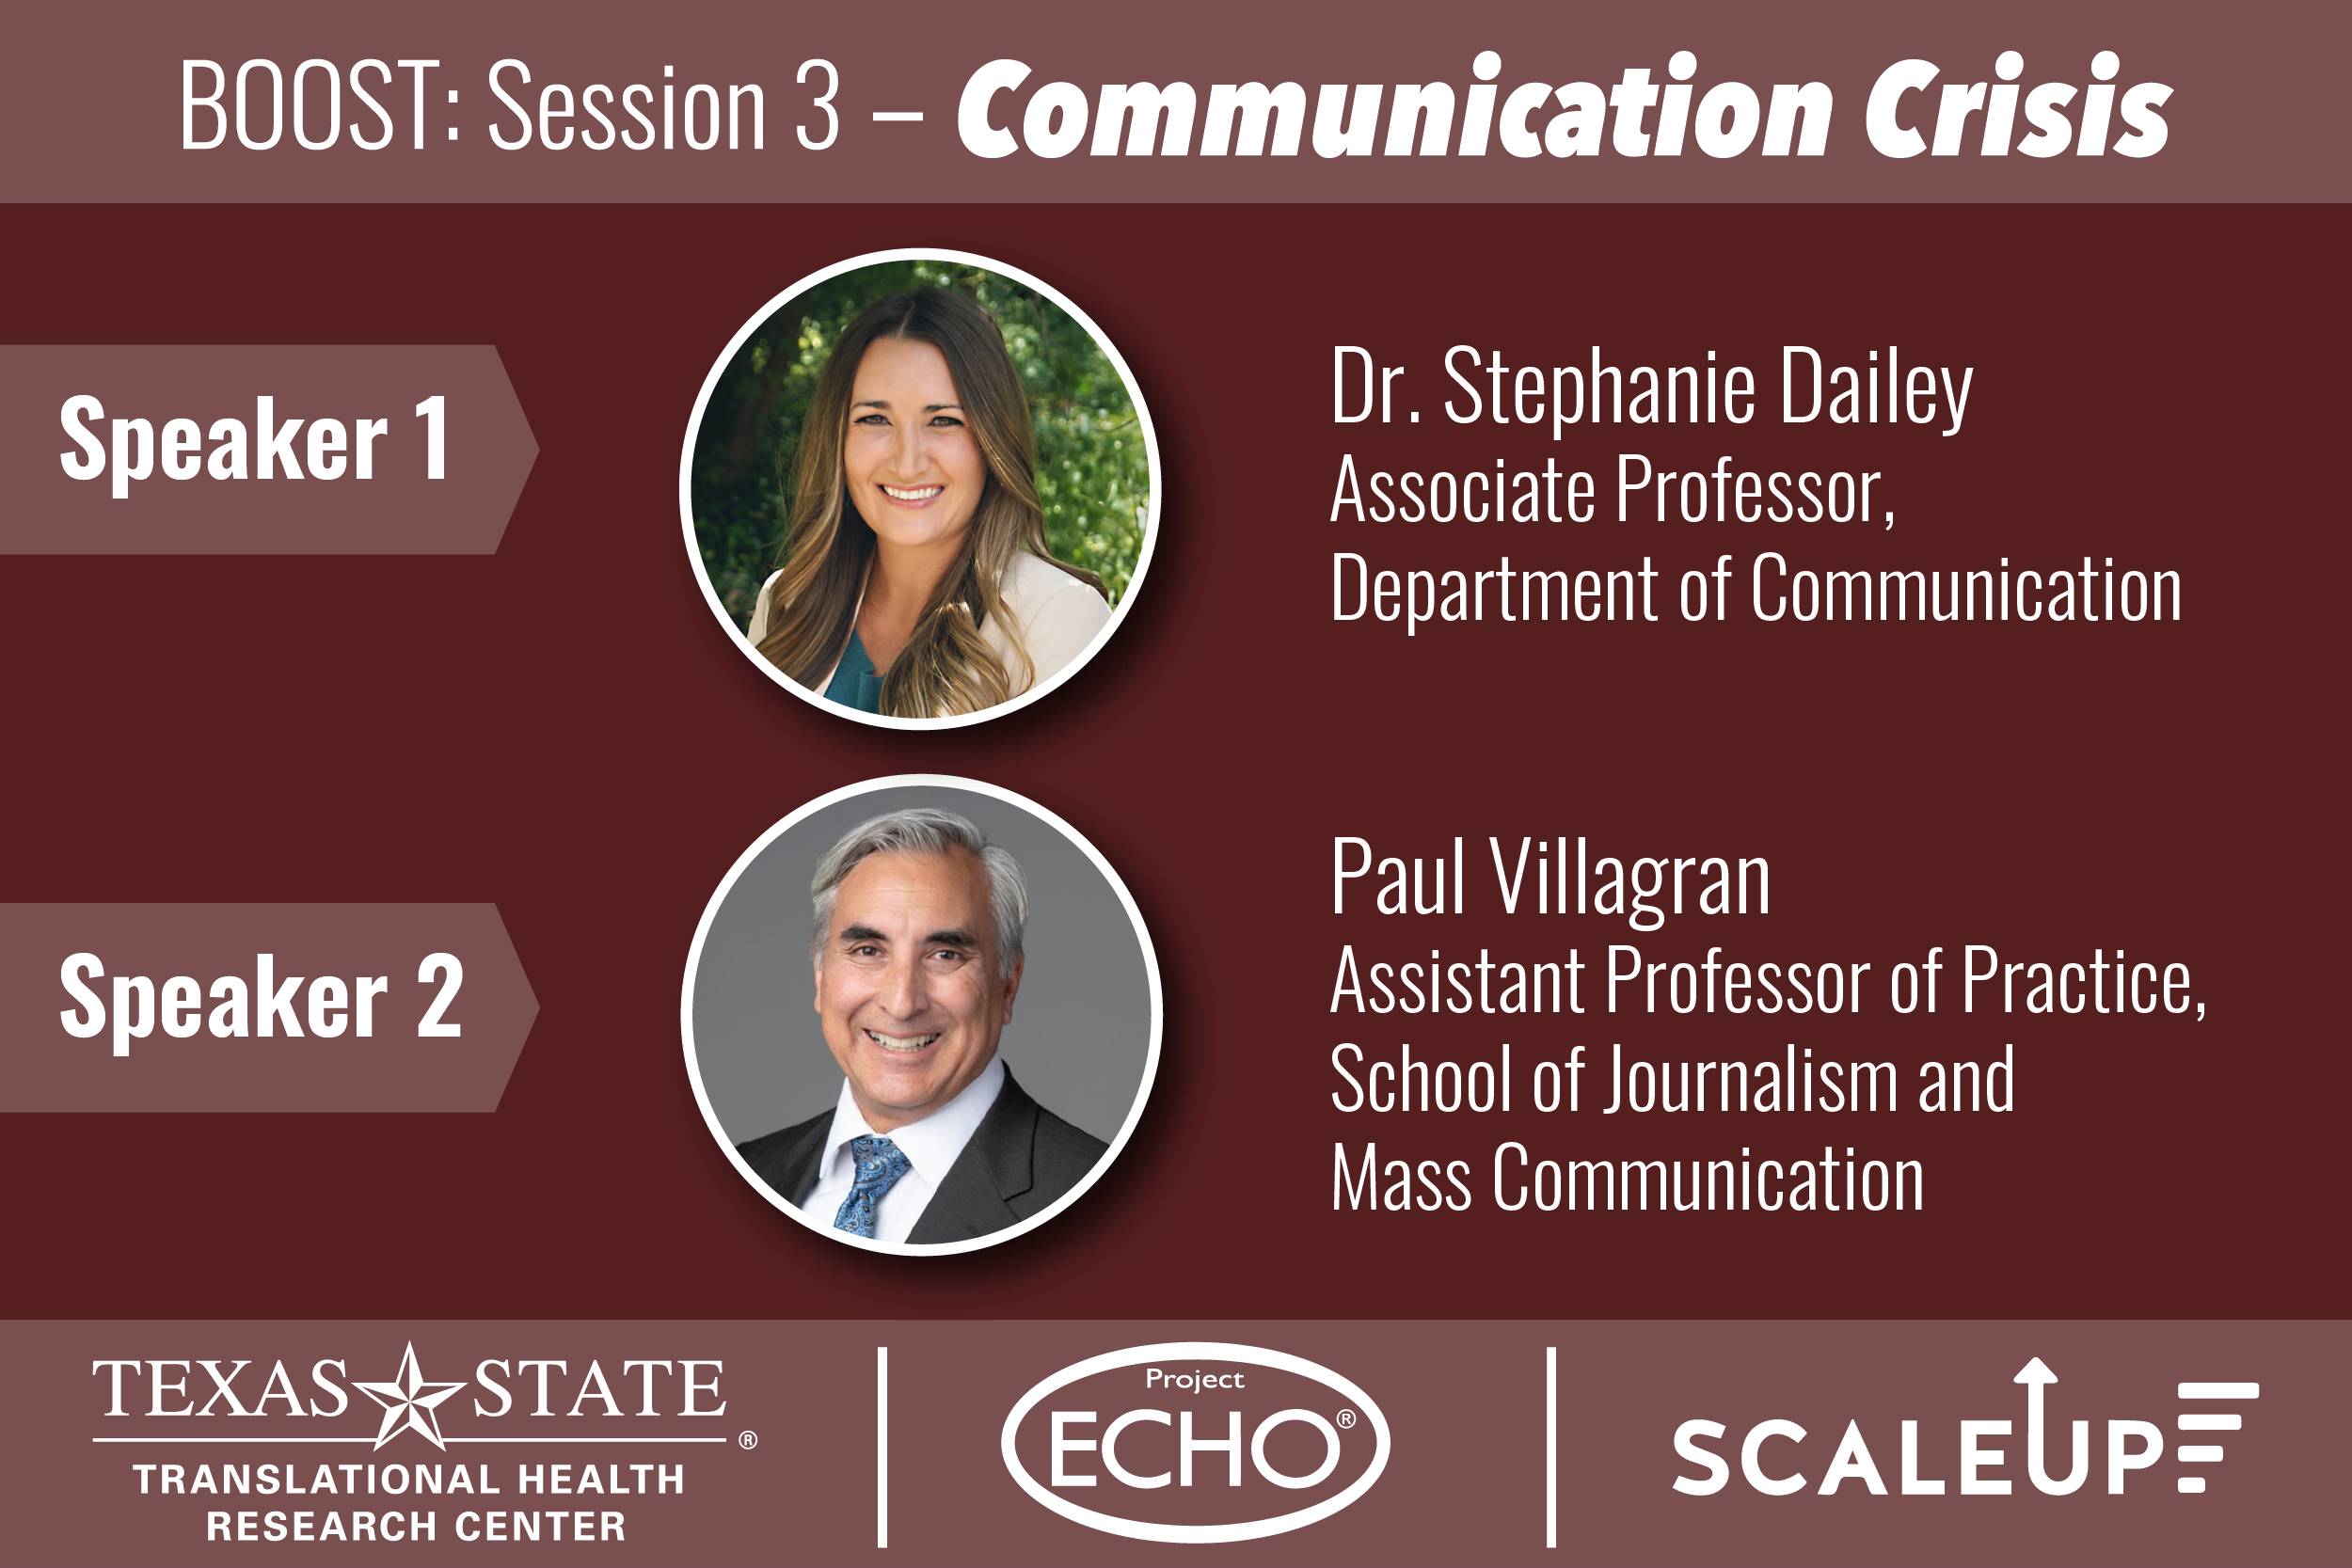 Headshots of Dr. Stephanie Dailey and Paul Villagran with the title "BOOST - Small Businesses Crisis Communication. With Guests Dr. Stephanie Dailey and Paul Villagran."